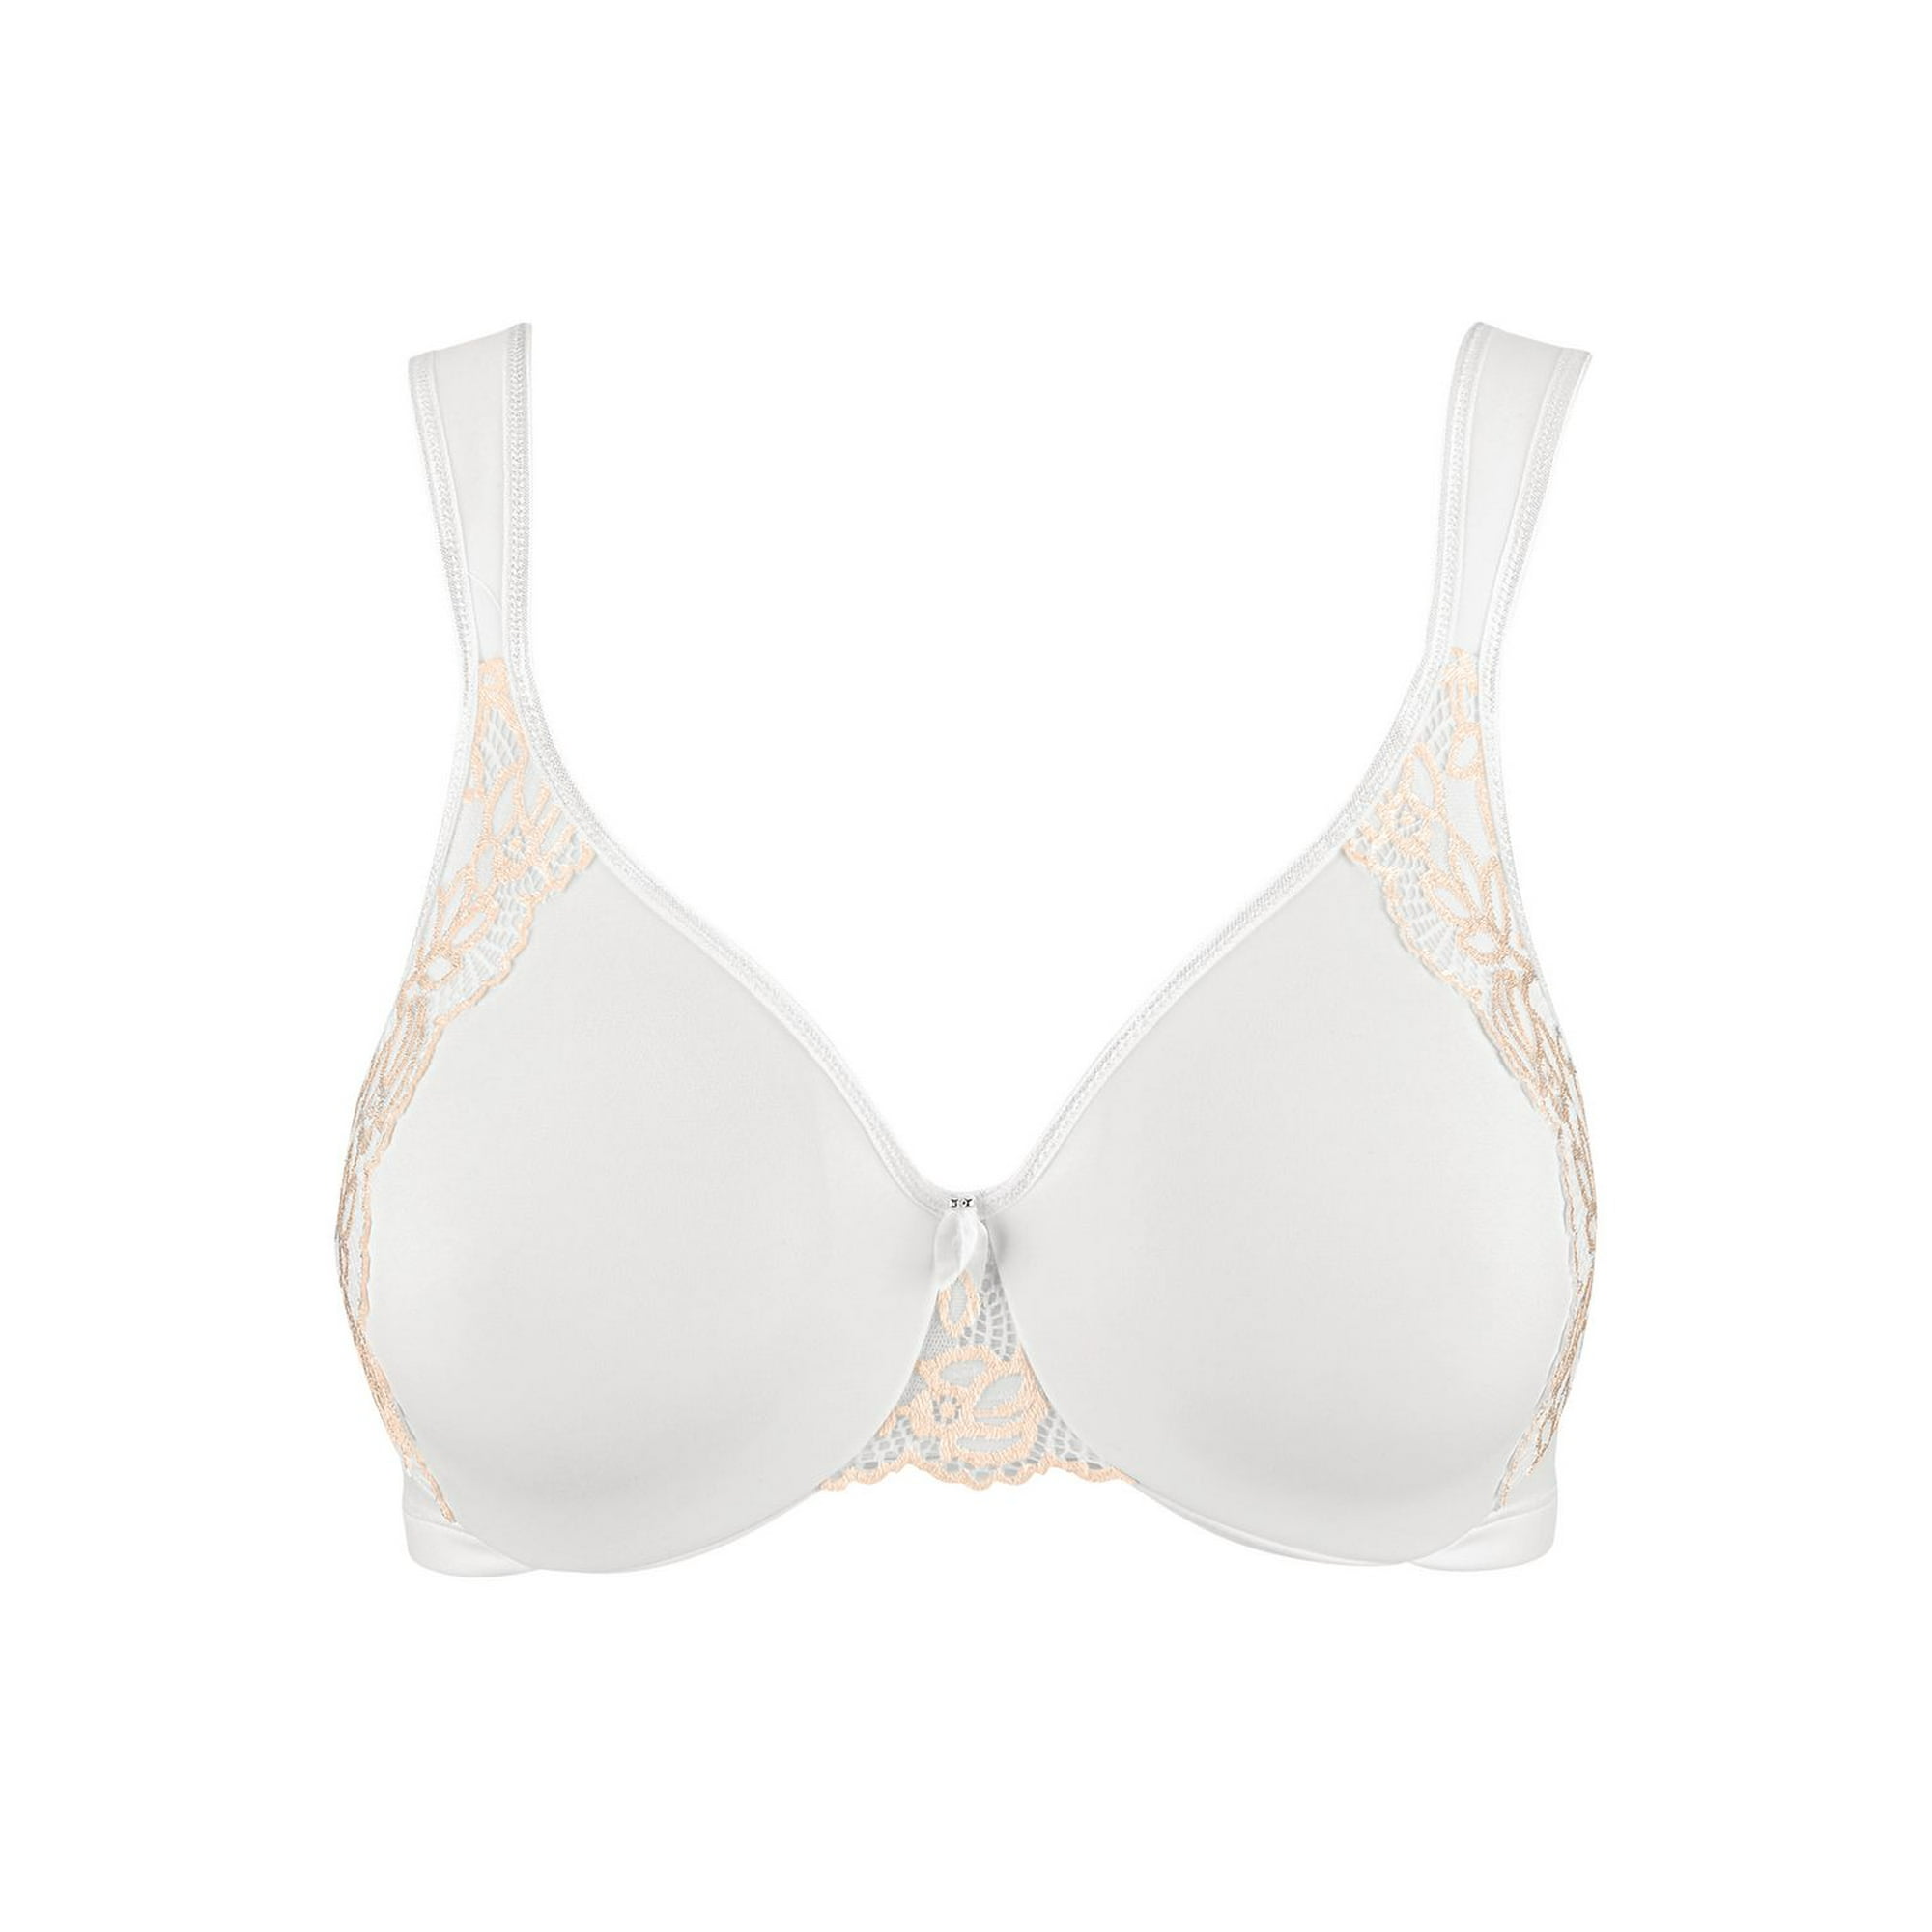 Buy White Recycled Lace Full Cup Comfort Bra 42B, Bras